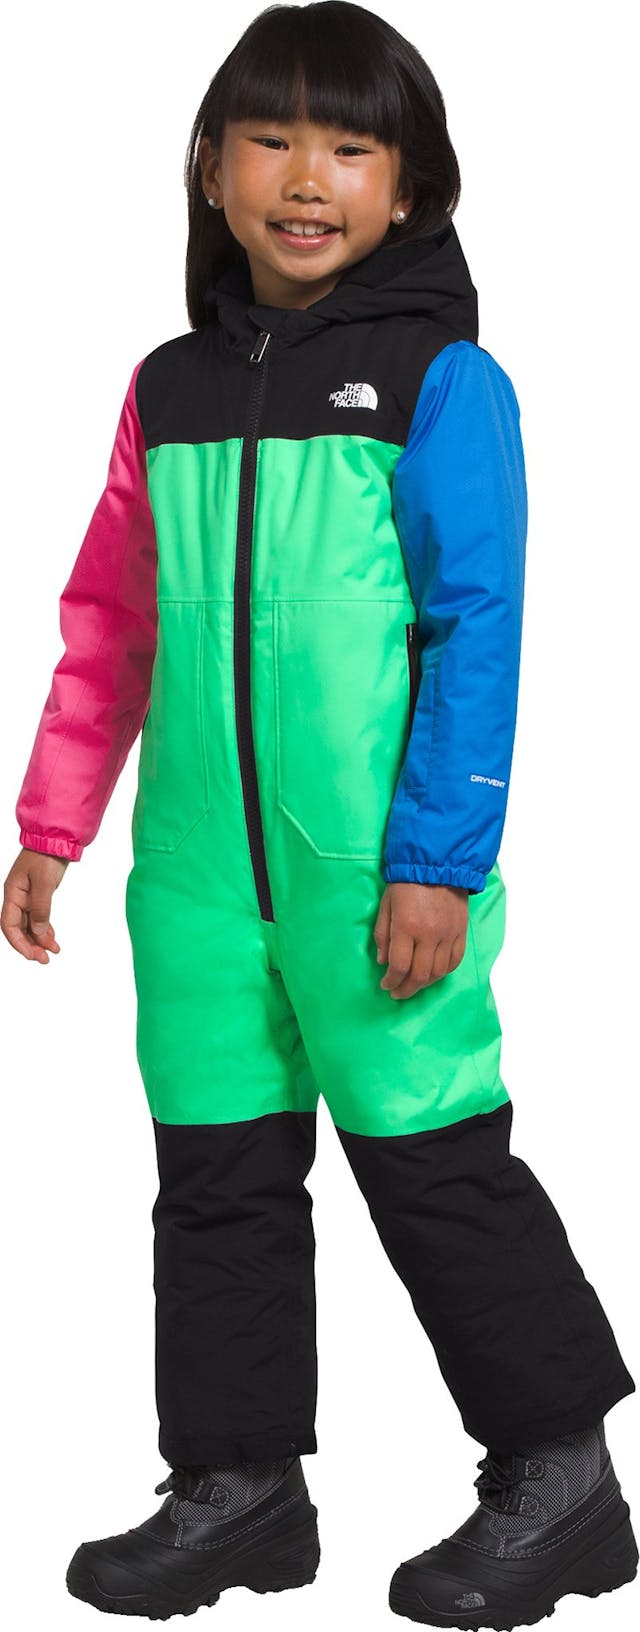 Product image for Freedom Snow Suit - Kids